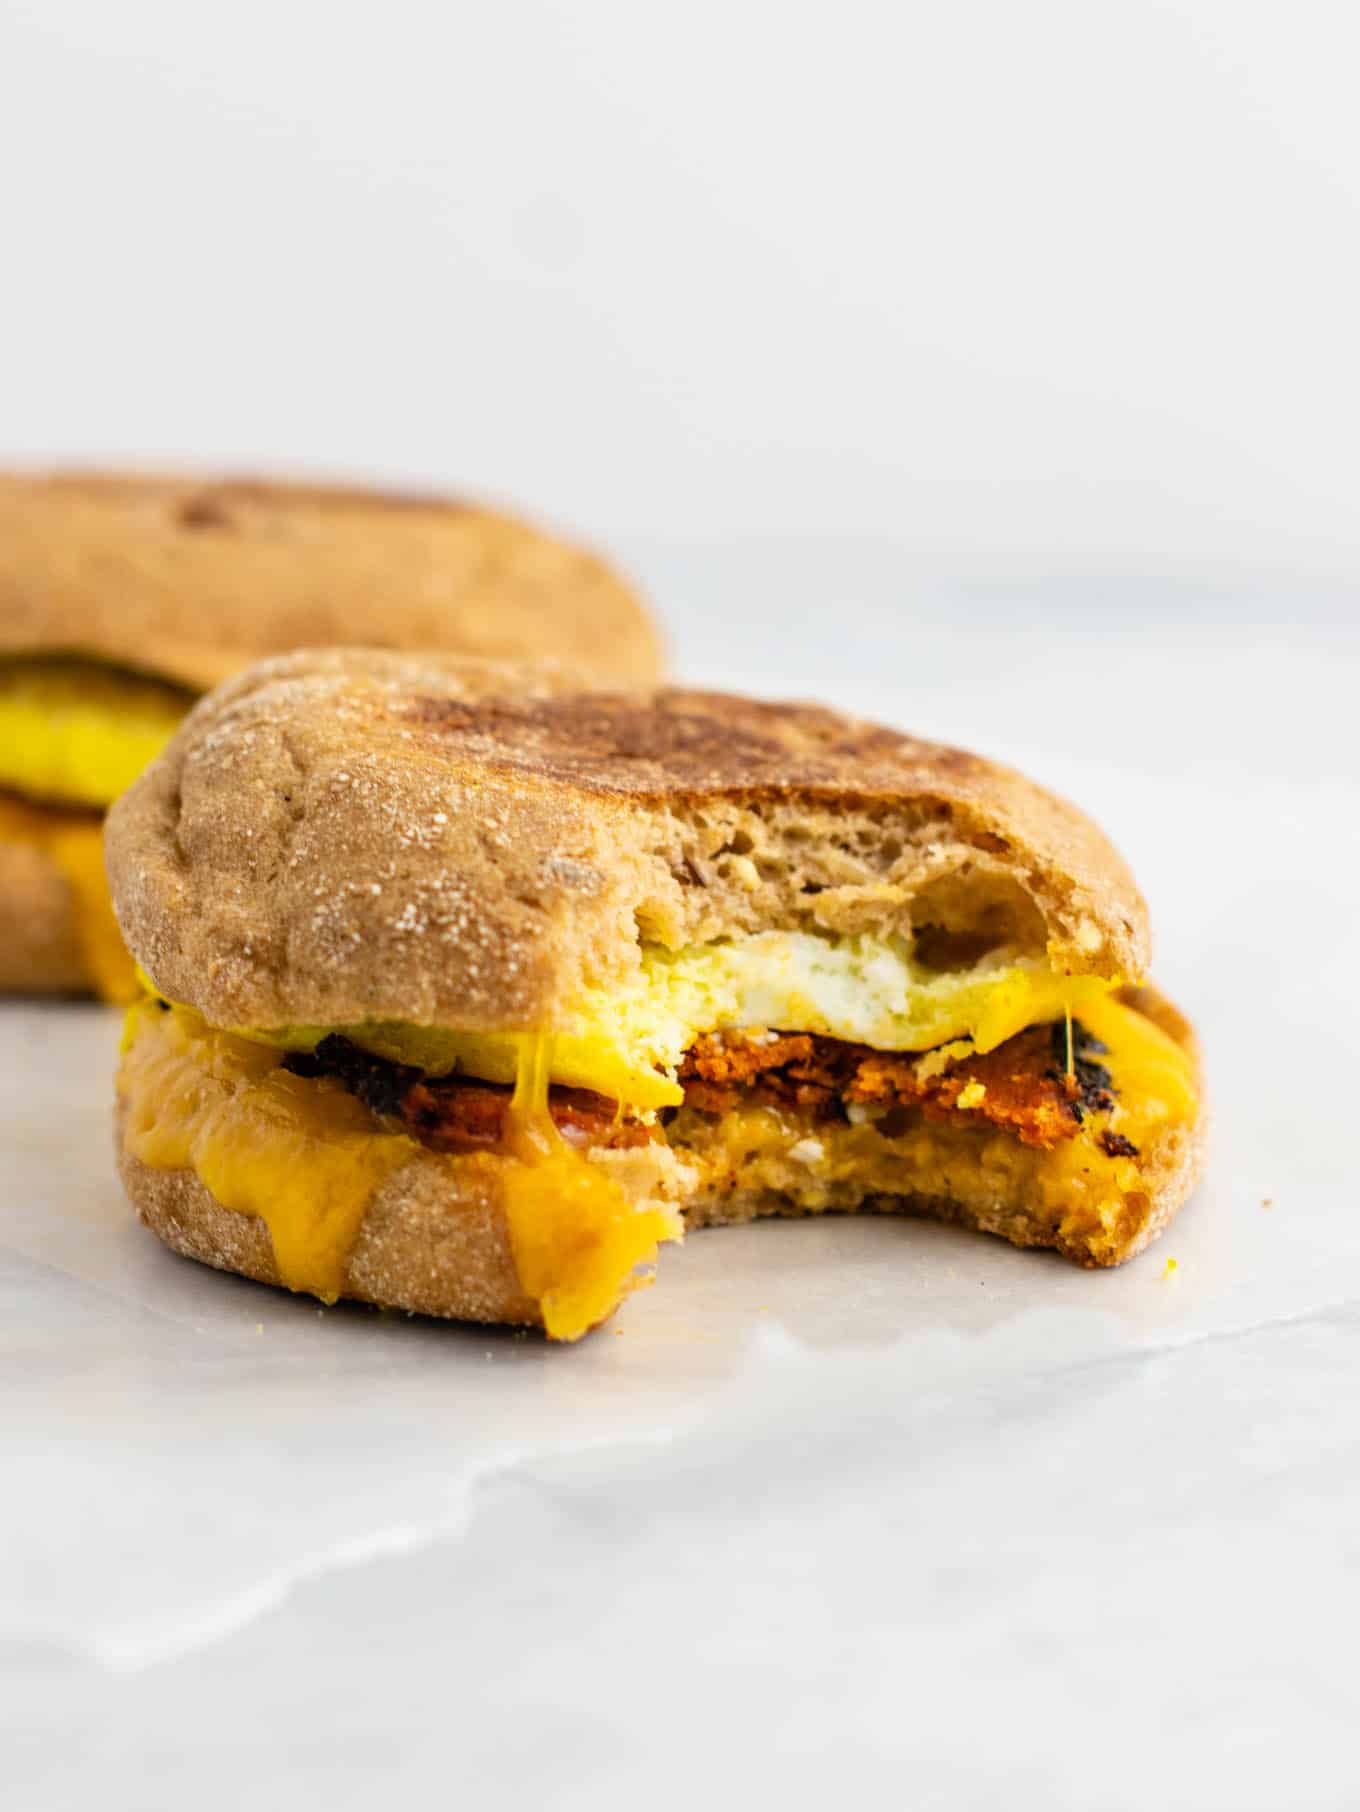 Meal Prep Vegetarian breakfast sandwich - these easy English muffin breakfast sandwiches taste amazing and are so easy to make! #vegetarian #breakfast #mealprep #englishmuffin #breakfastsandwich 